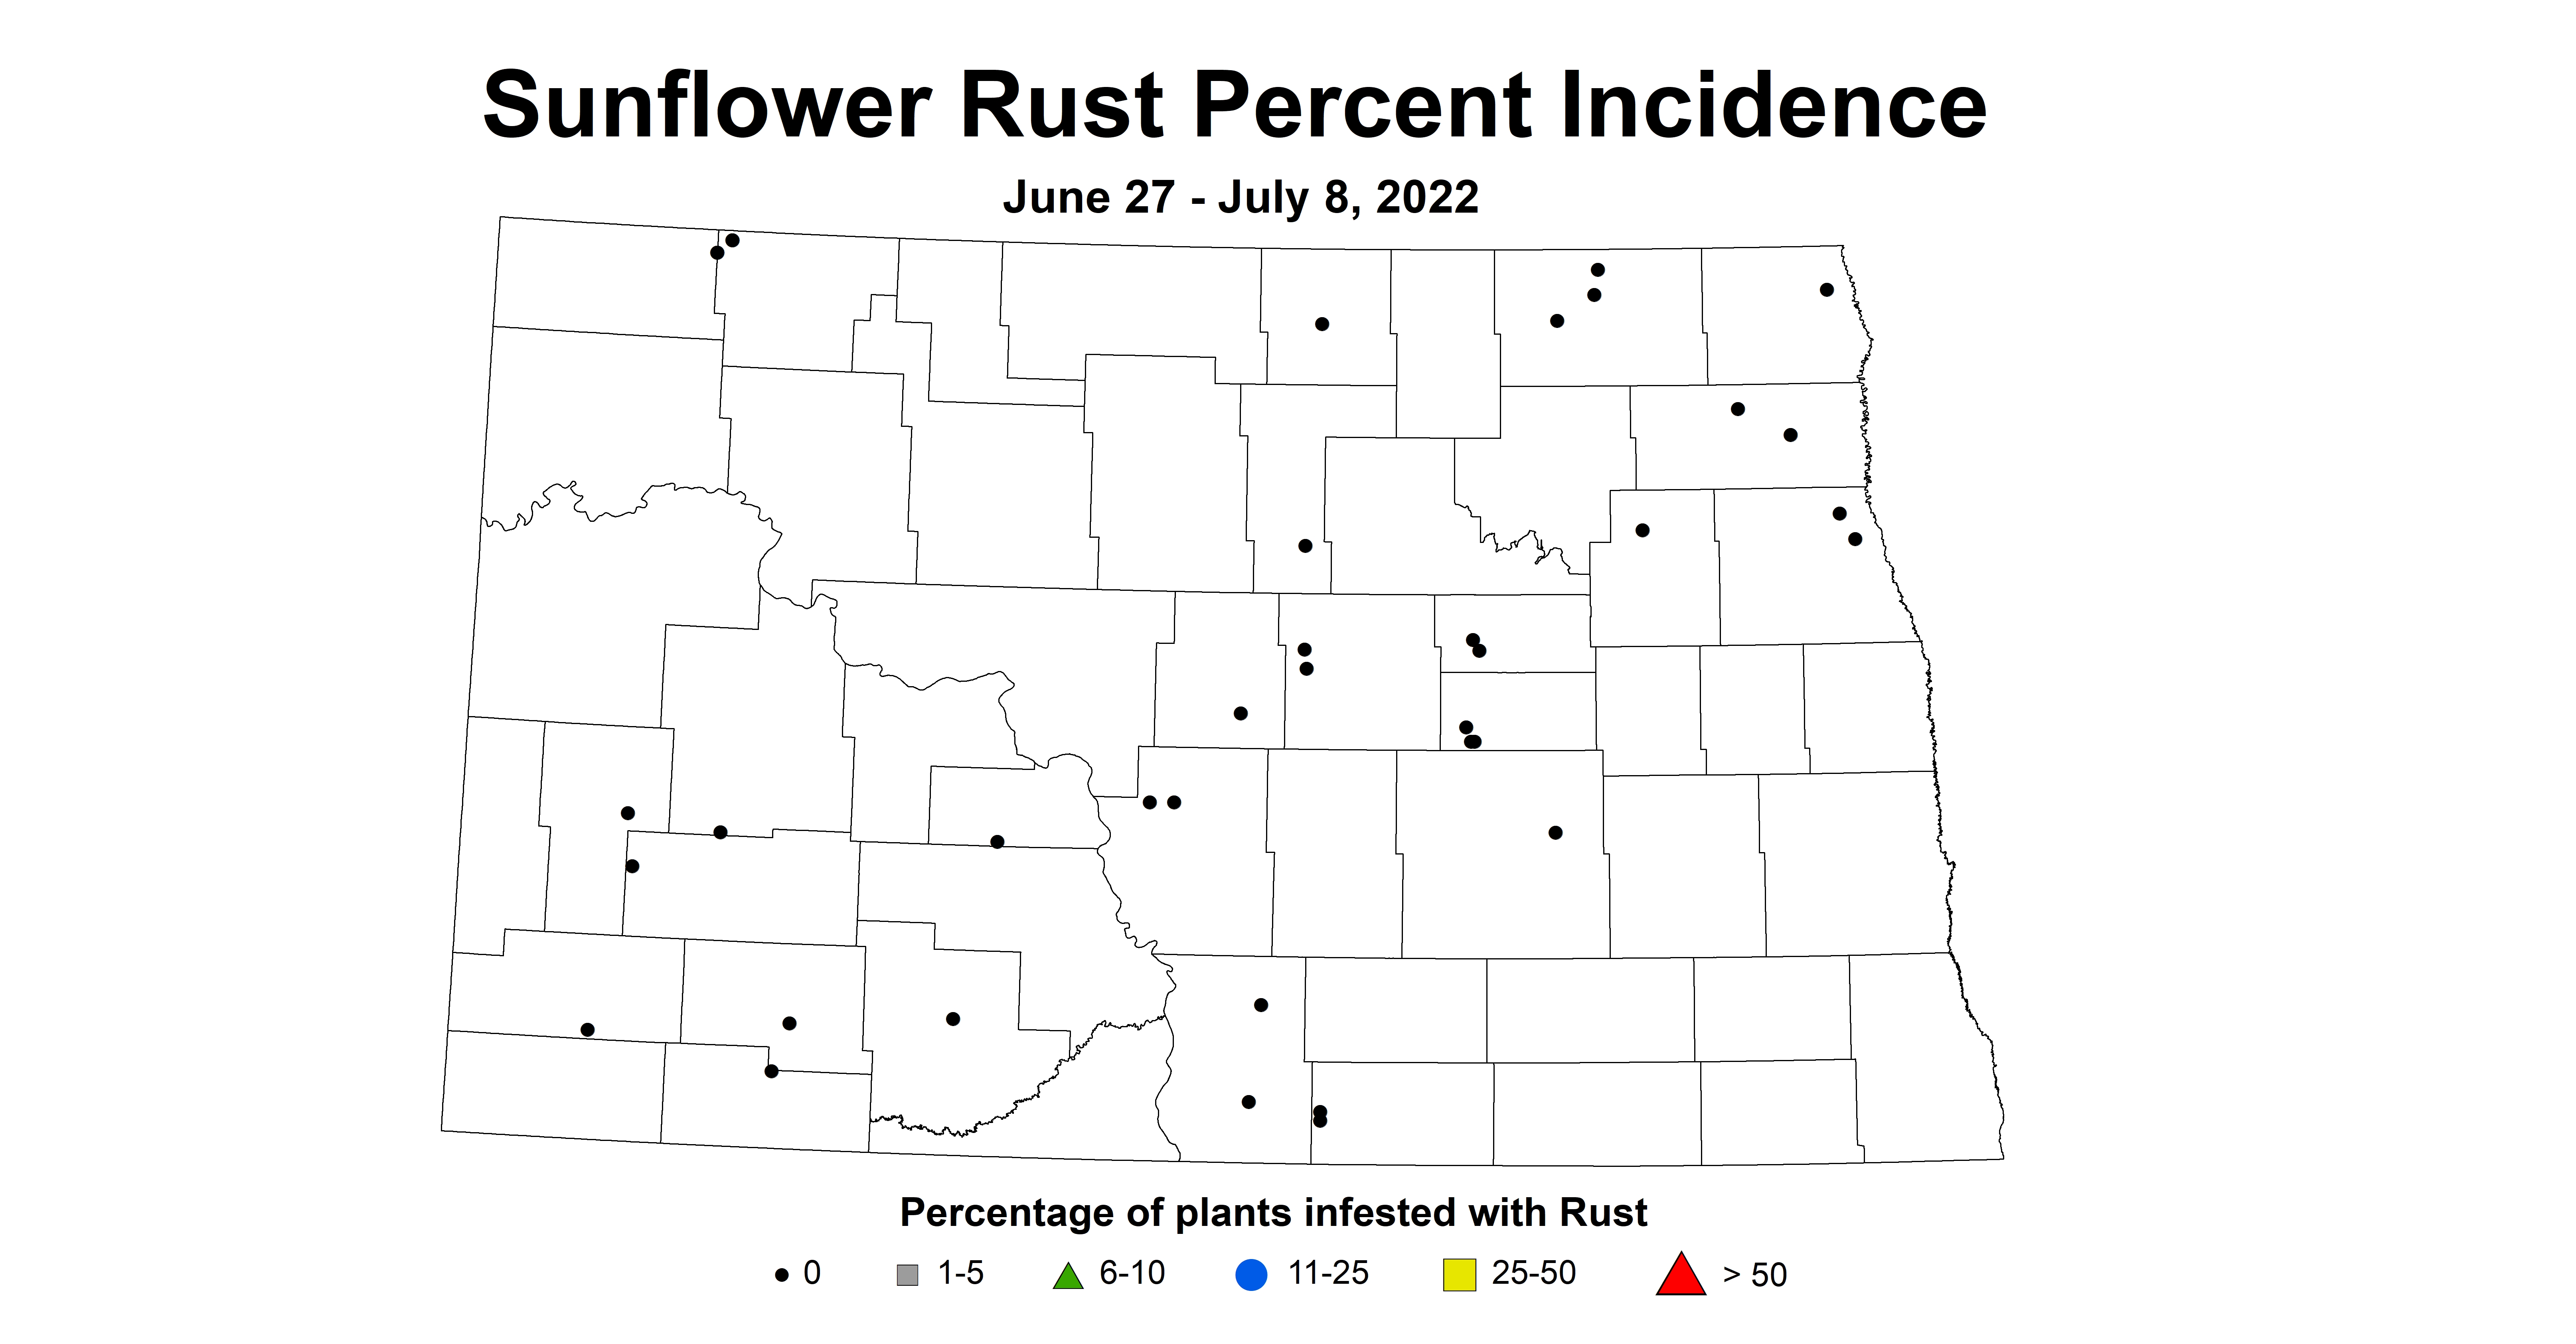 ND IPM map of sunflower rust incidence June 27 to July 8 2022